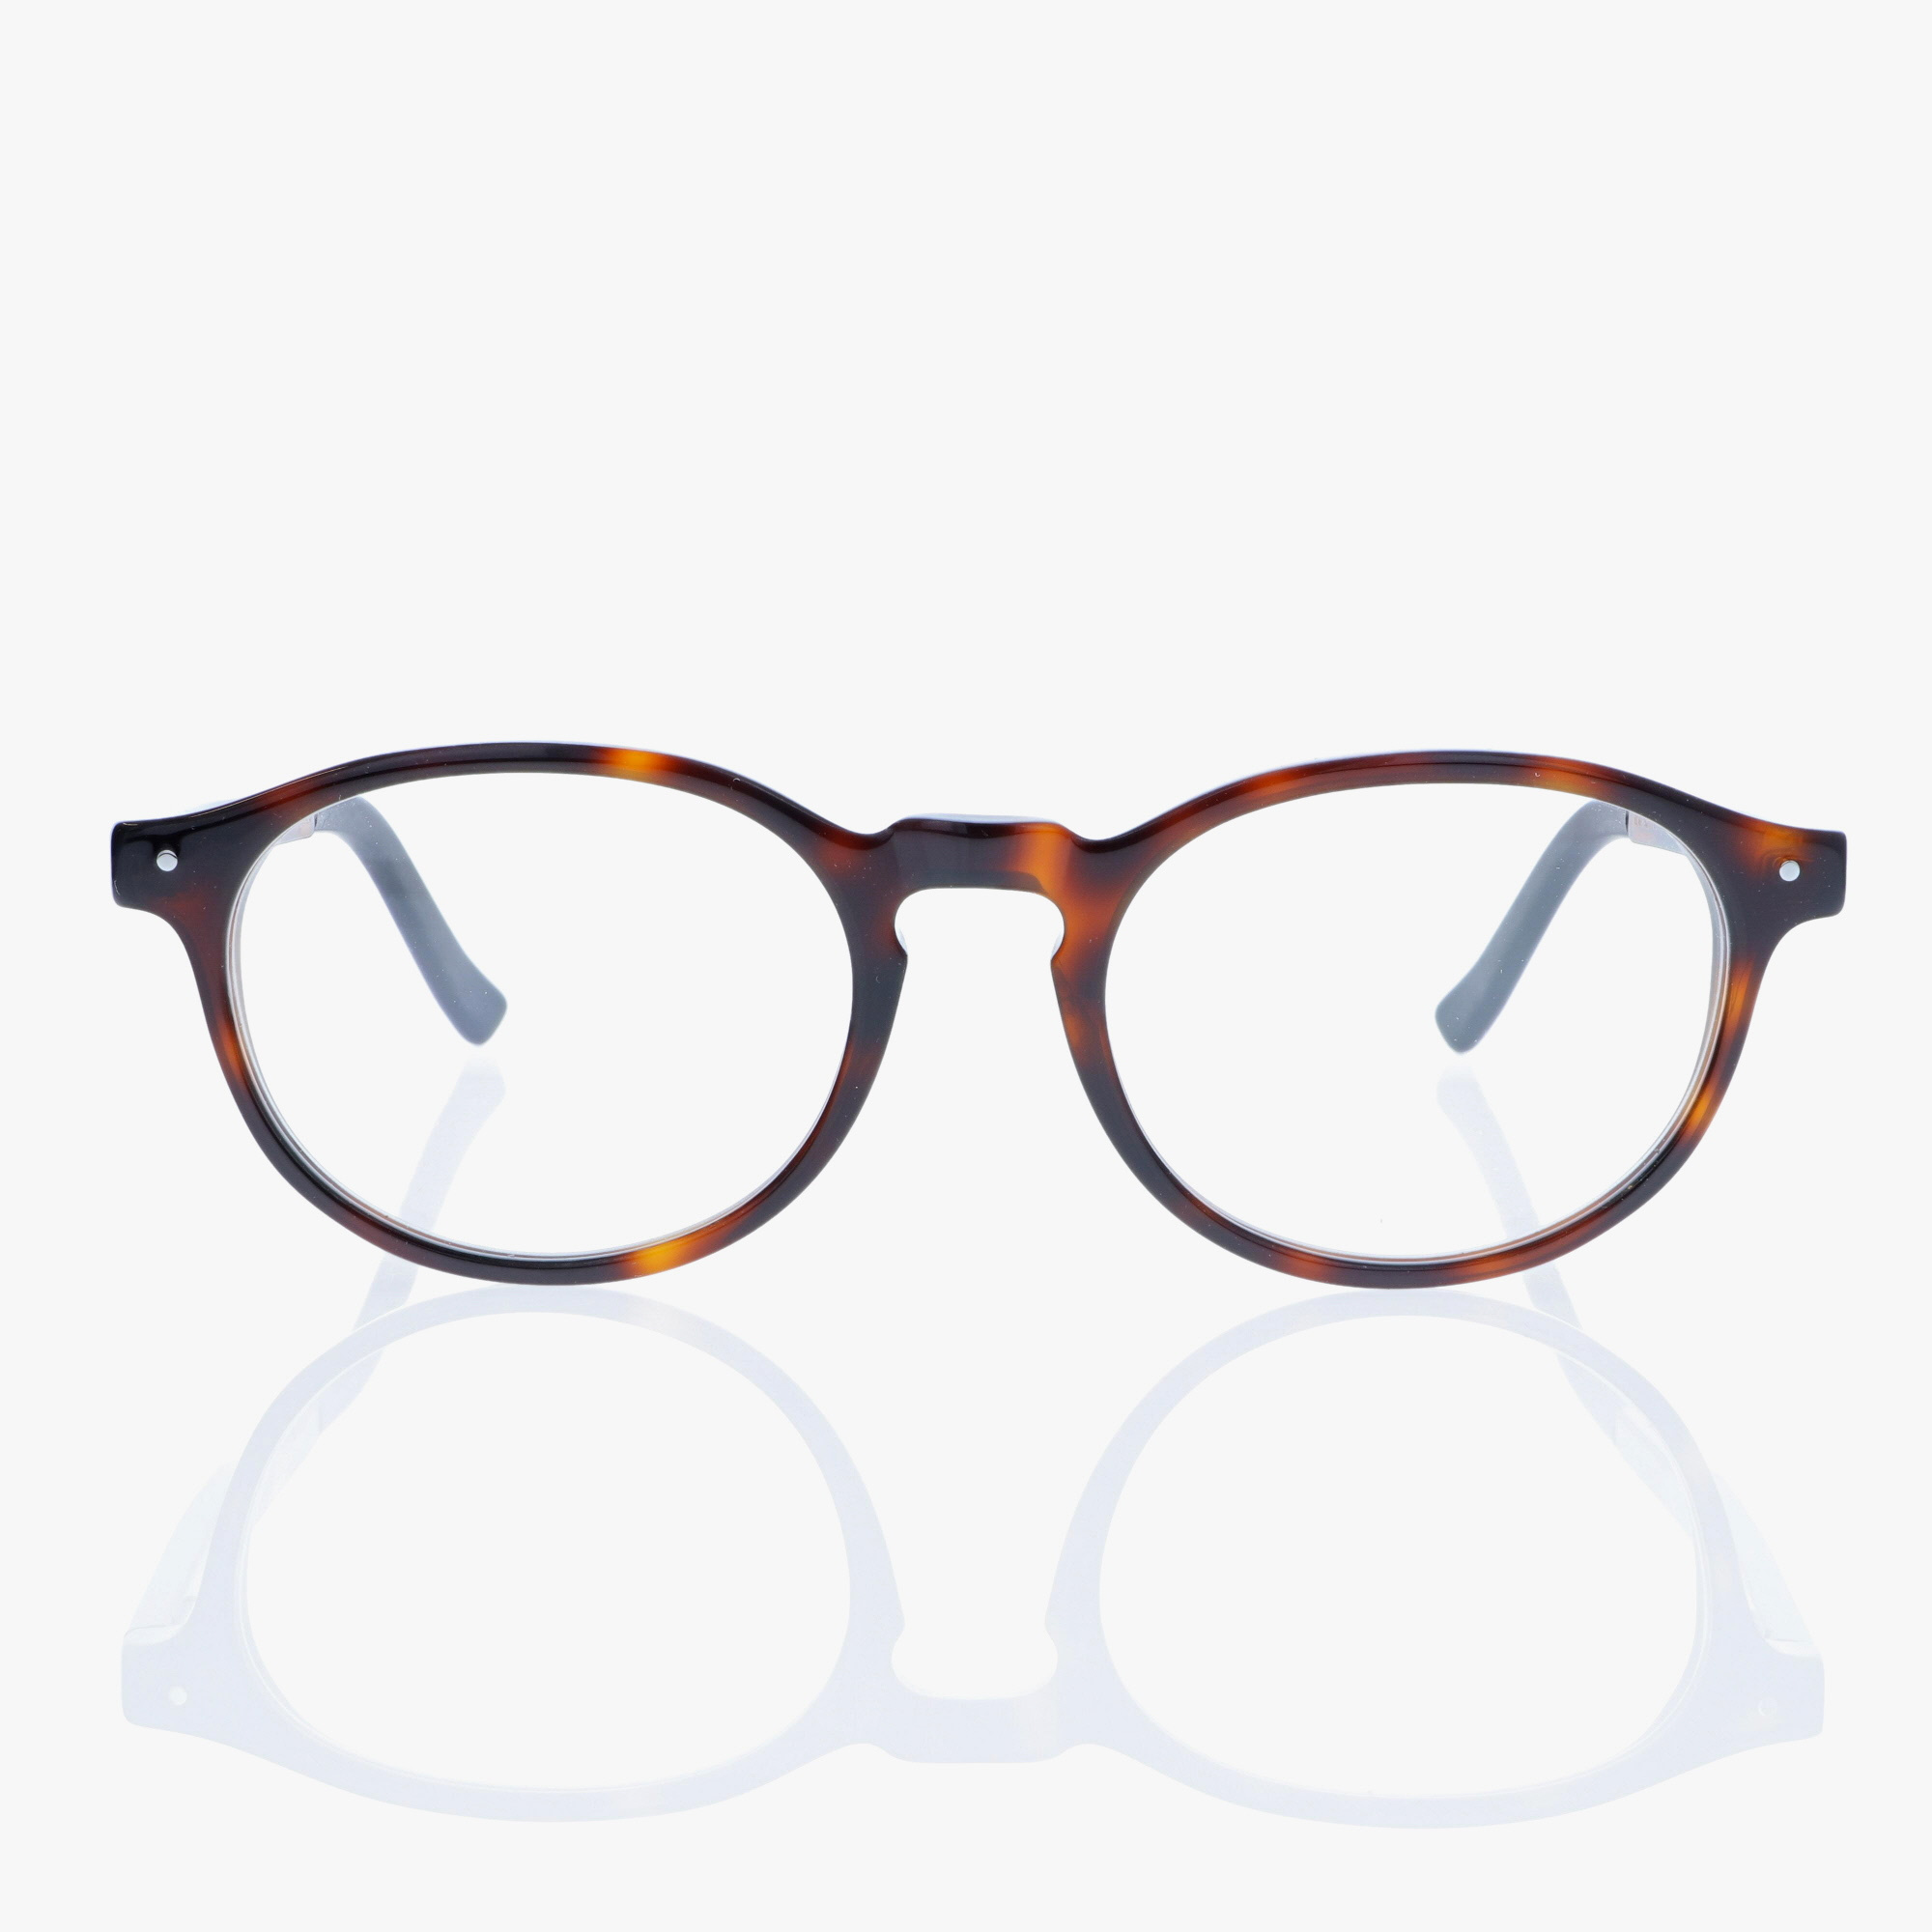 VERY FRENCH GANGSTERS / CLEVER 2 / DEEP TORTOISE SHELL